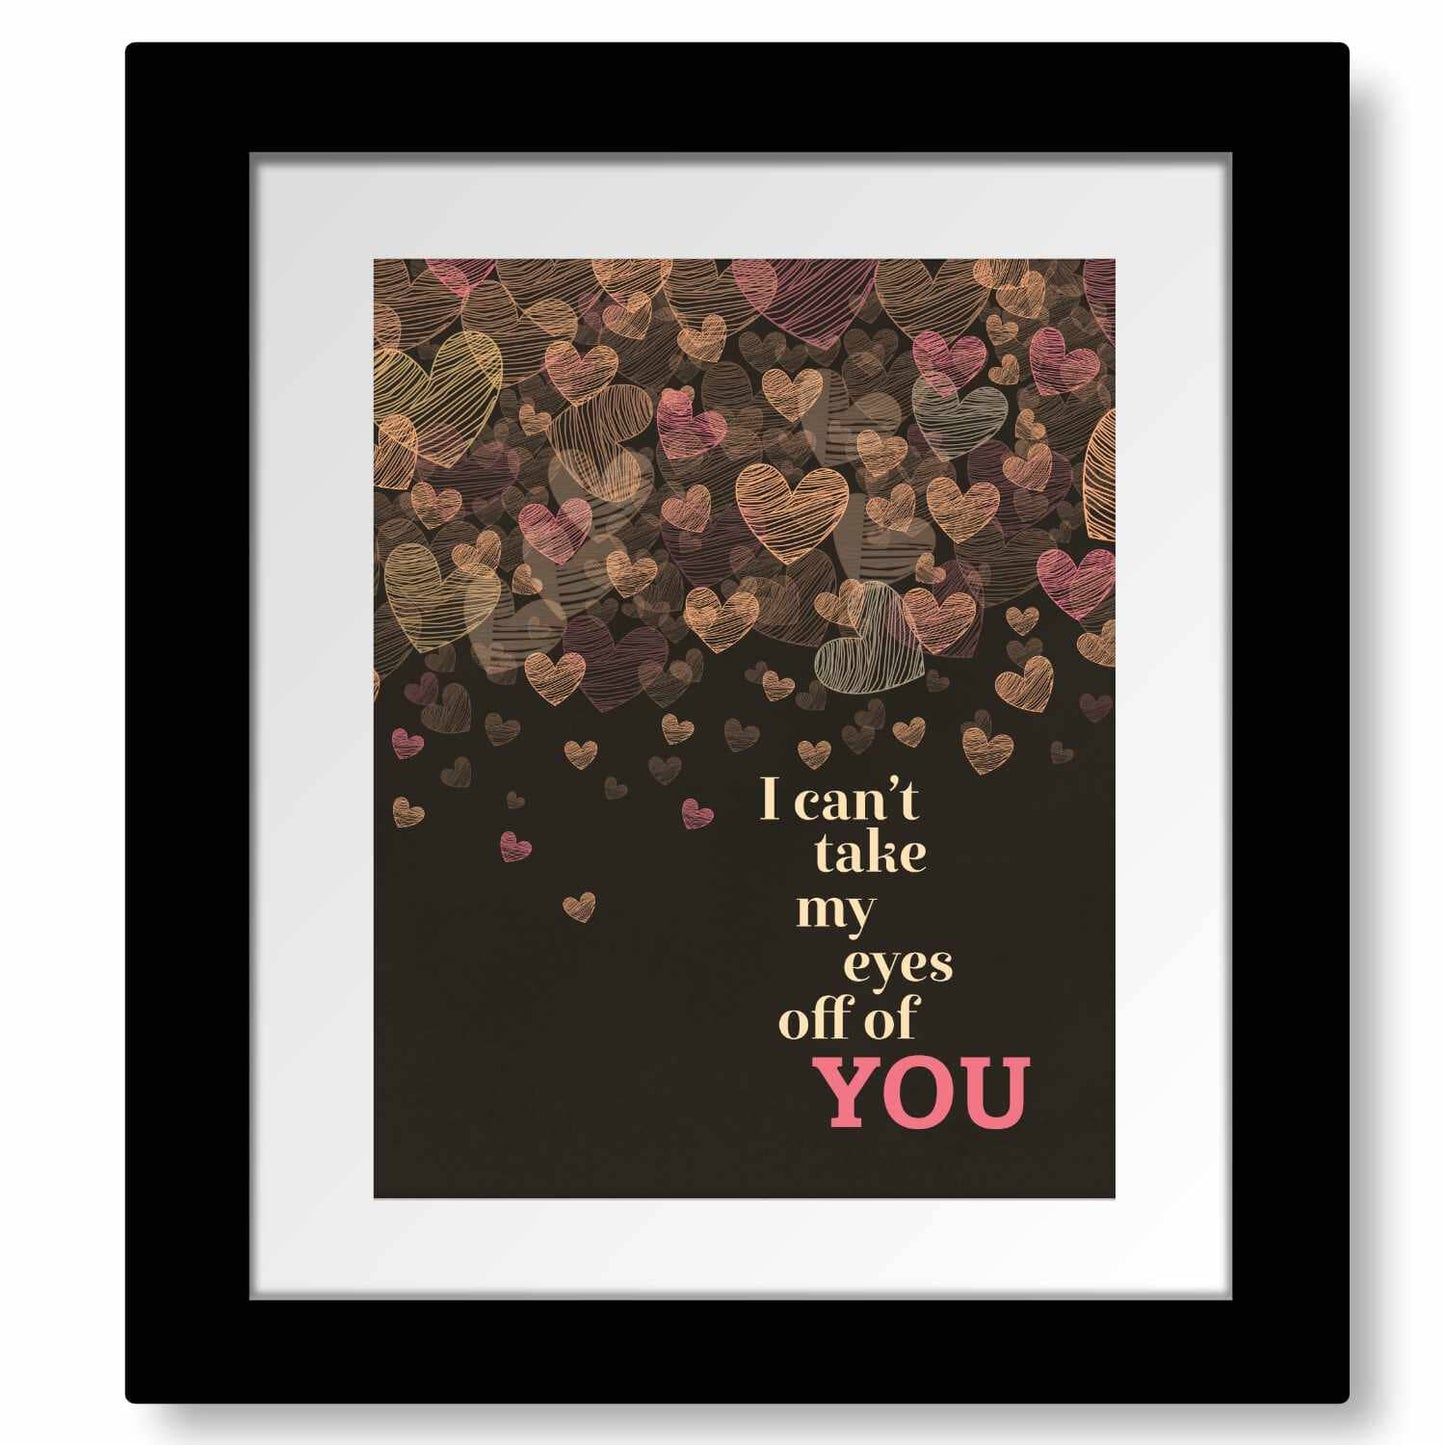 Can't Take My Eyes off You by Frankie Valli - 60s Love Song Song Lyrics Art Song Lyrics Art 8x10 Matted and Framed Print 